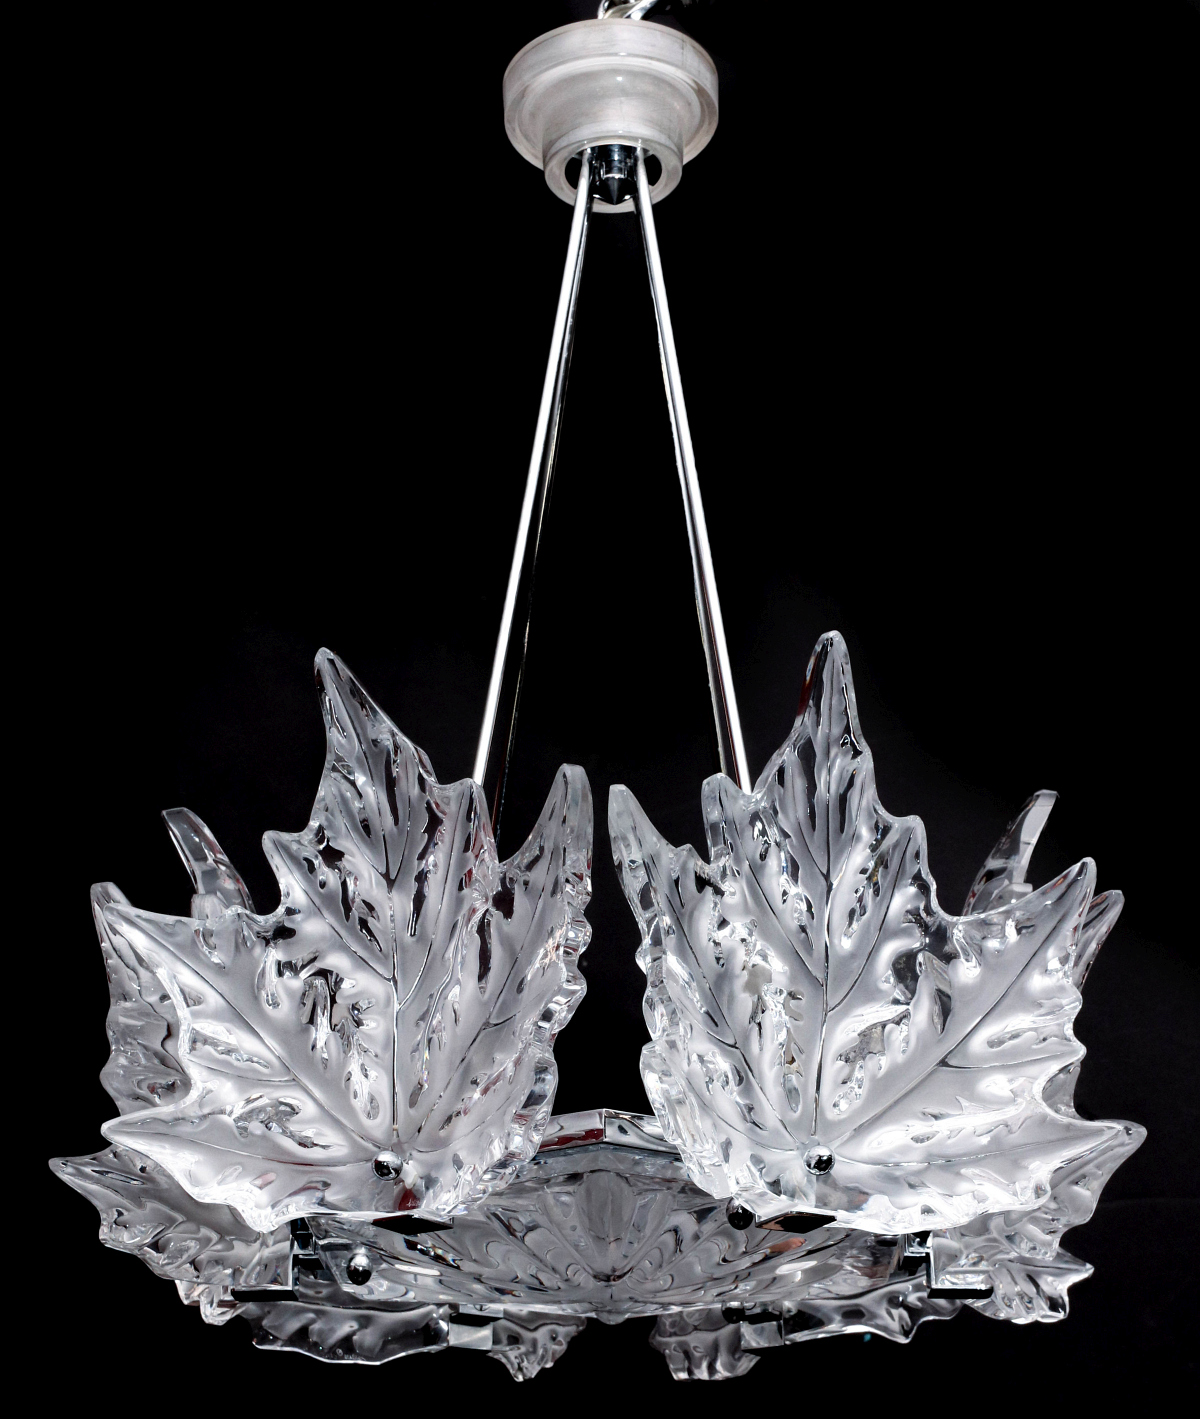 A LALIQUE CHAMPS-ELYSEES FRENCH CRYSTAL CHANDELIER